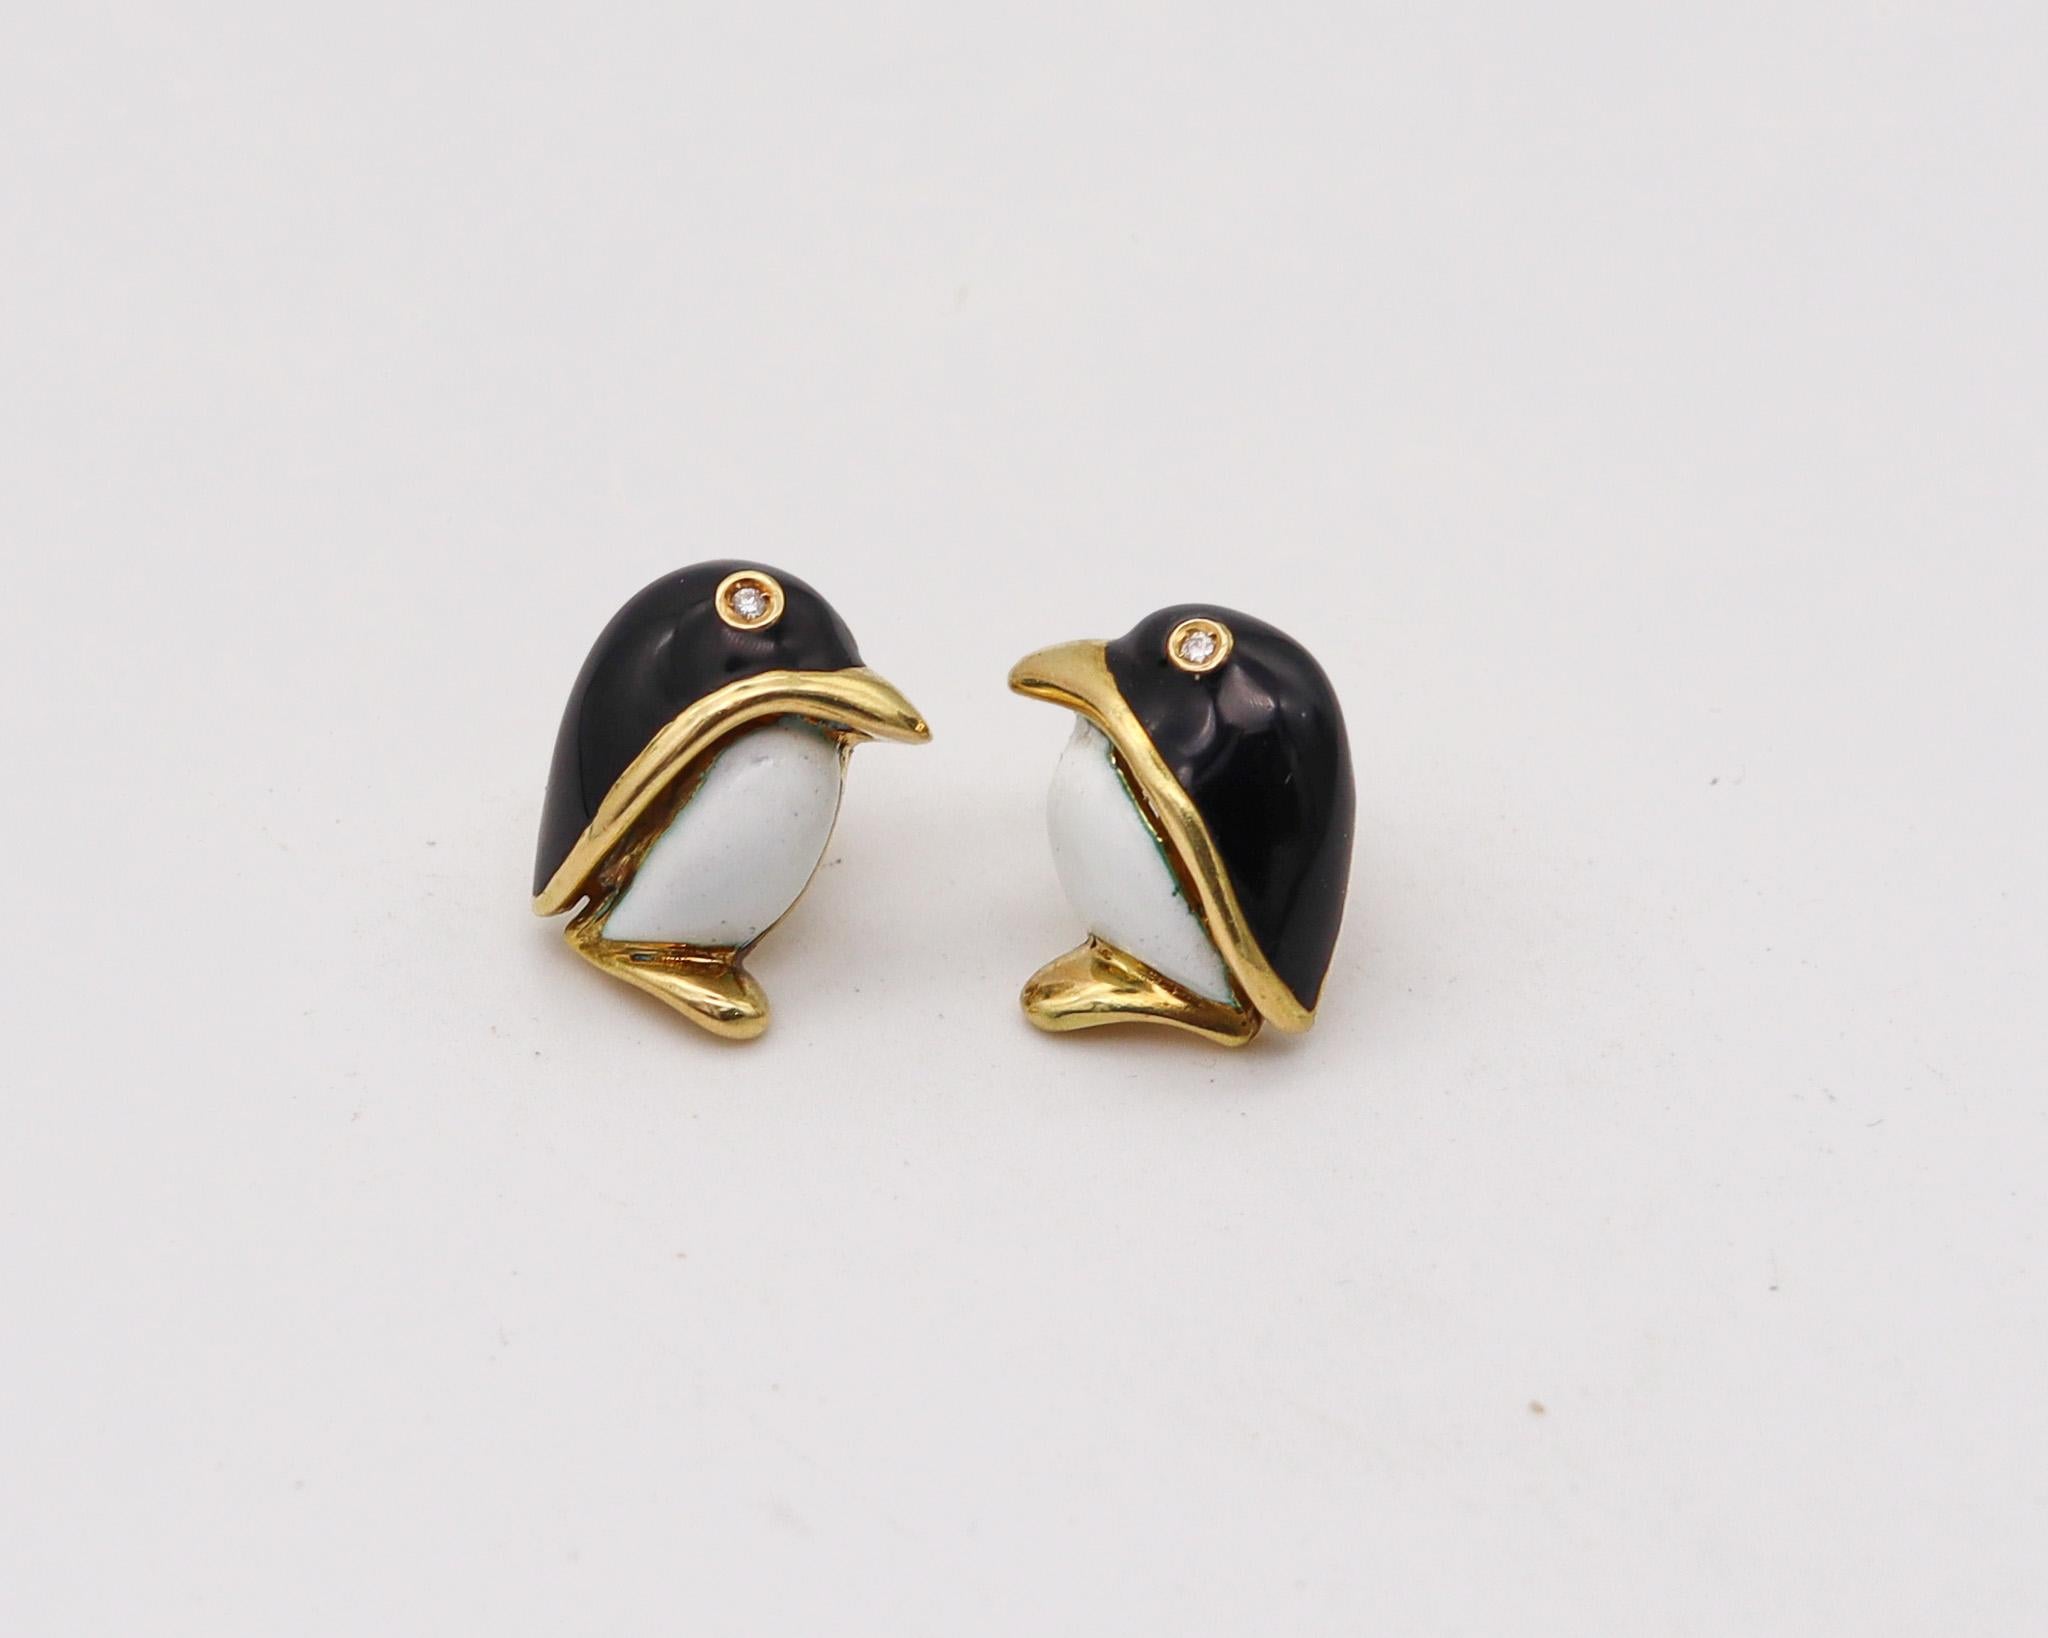 Enameled pinguins studs-earrings designed by Fasano.

Very cute and youthful pair of earrings in the shape of standing pinguins. They were crafted in Italy by the jewelry designer Fasano in solid yellow gold of 18 karats with high polished finish.